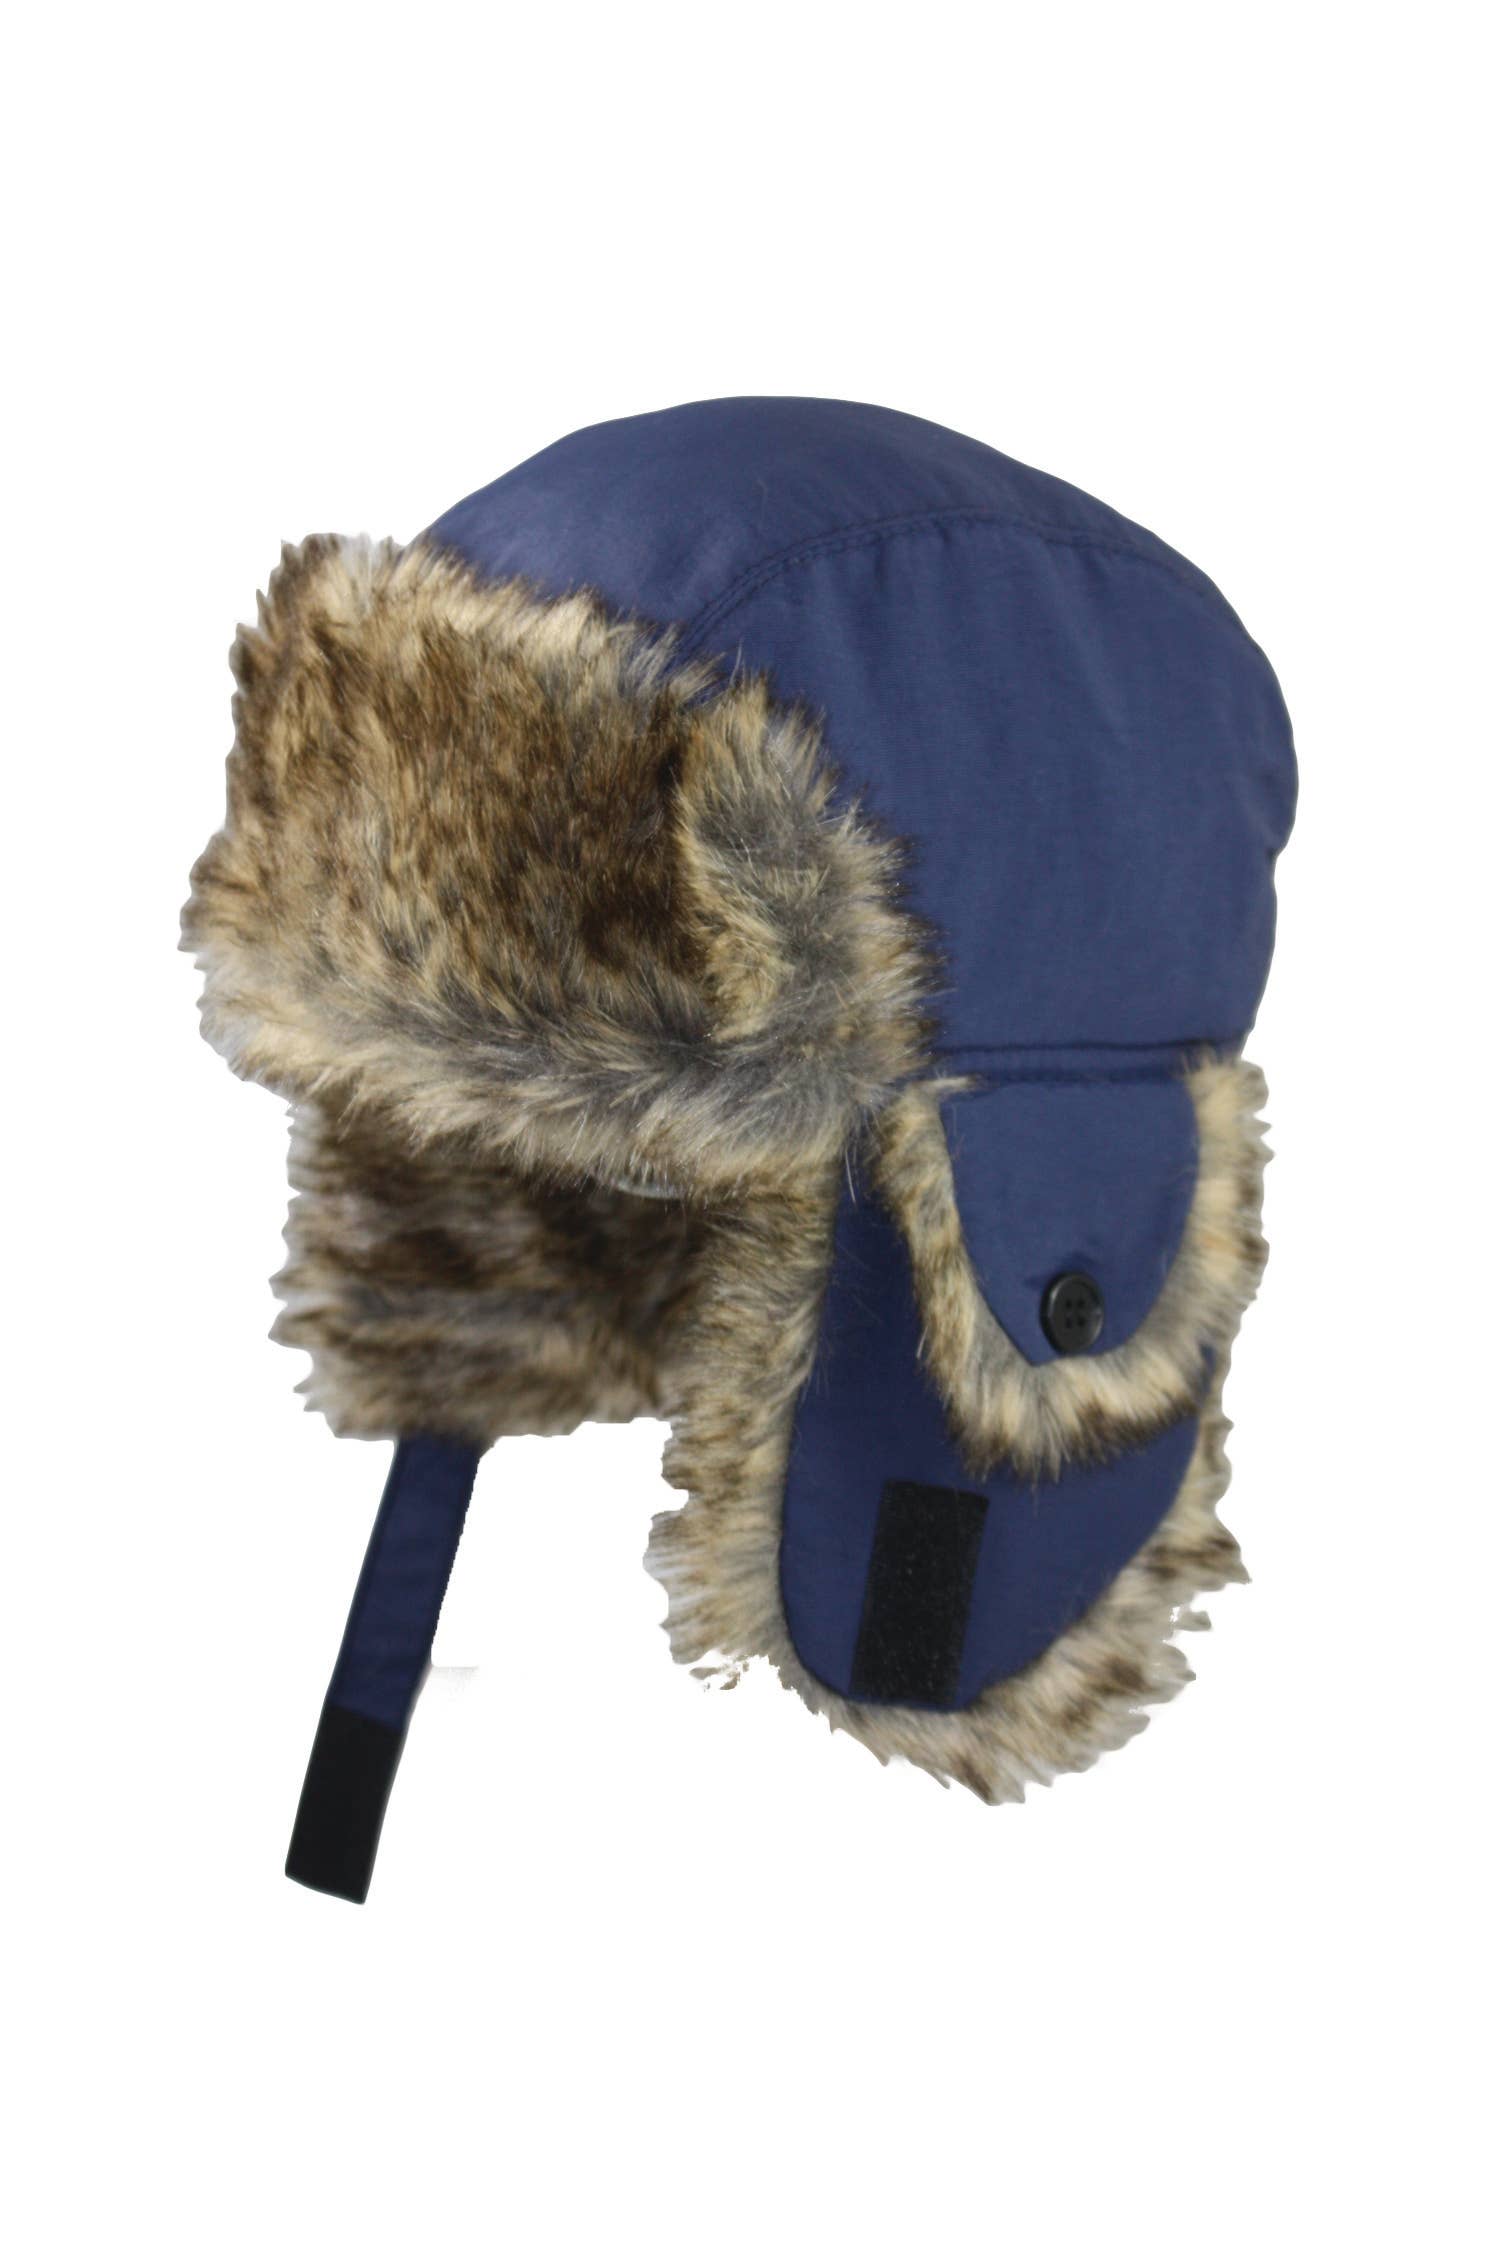 Children's Fur Lined Cap with Flaps - Blue